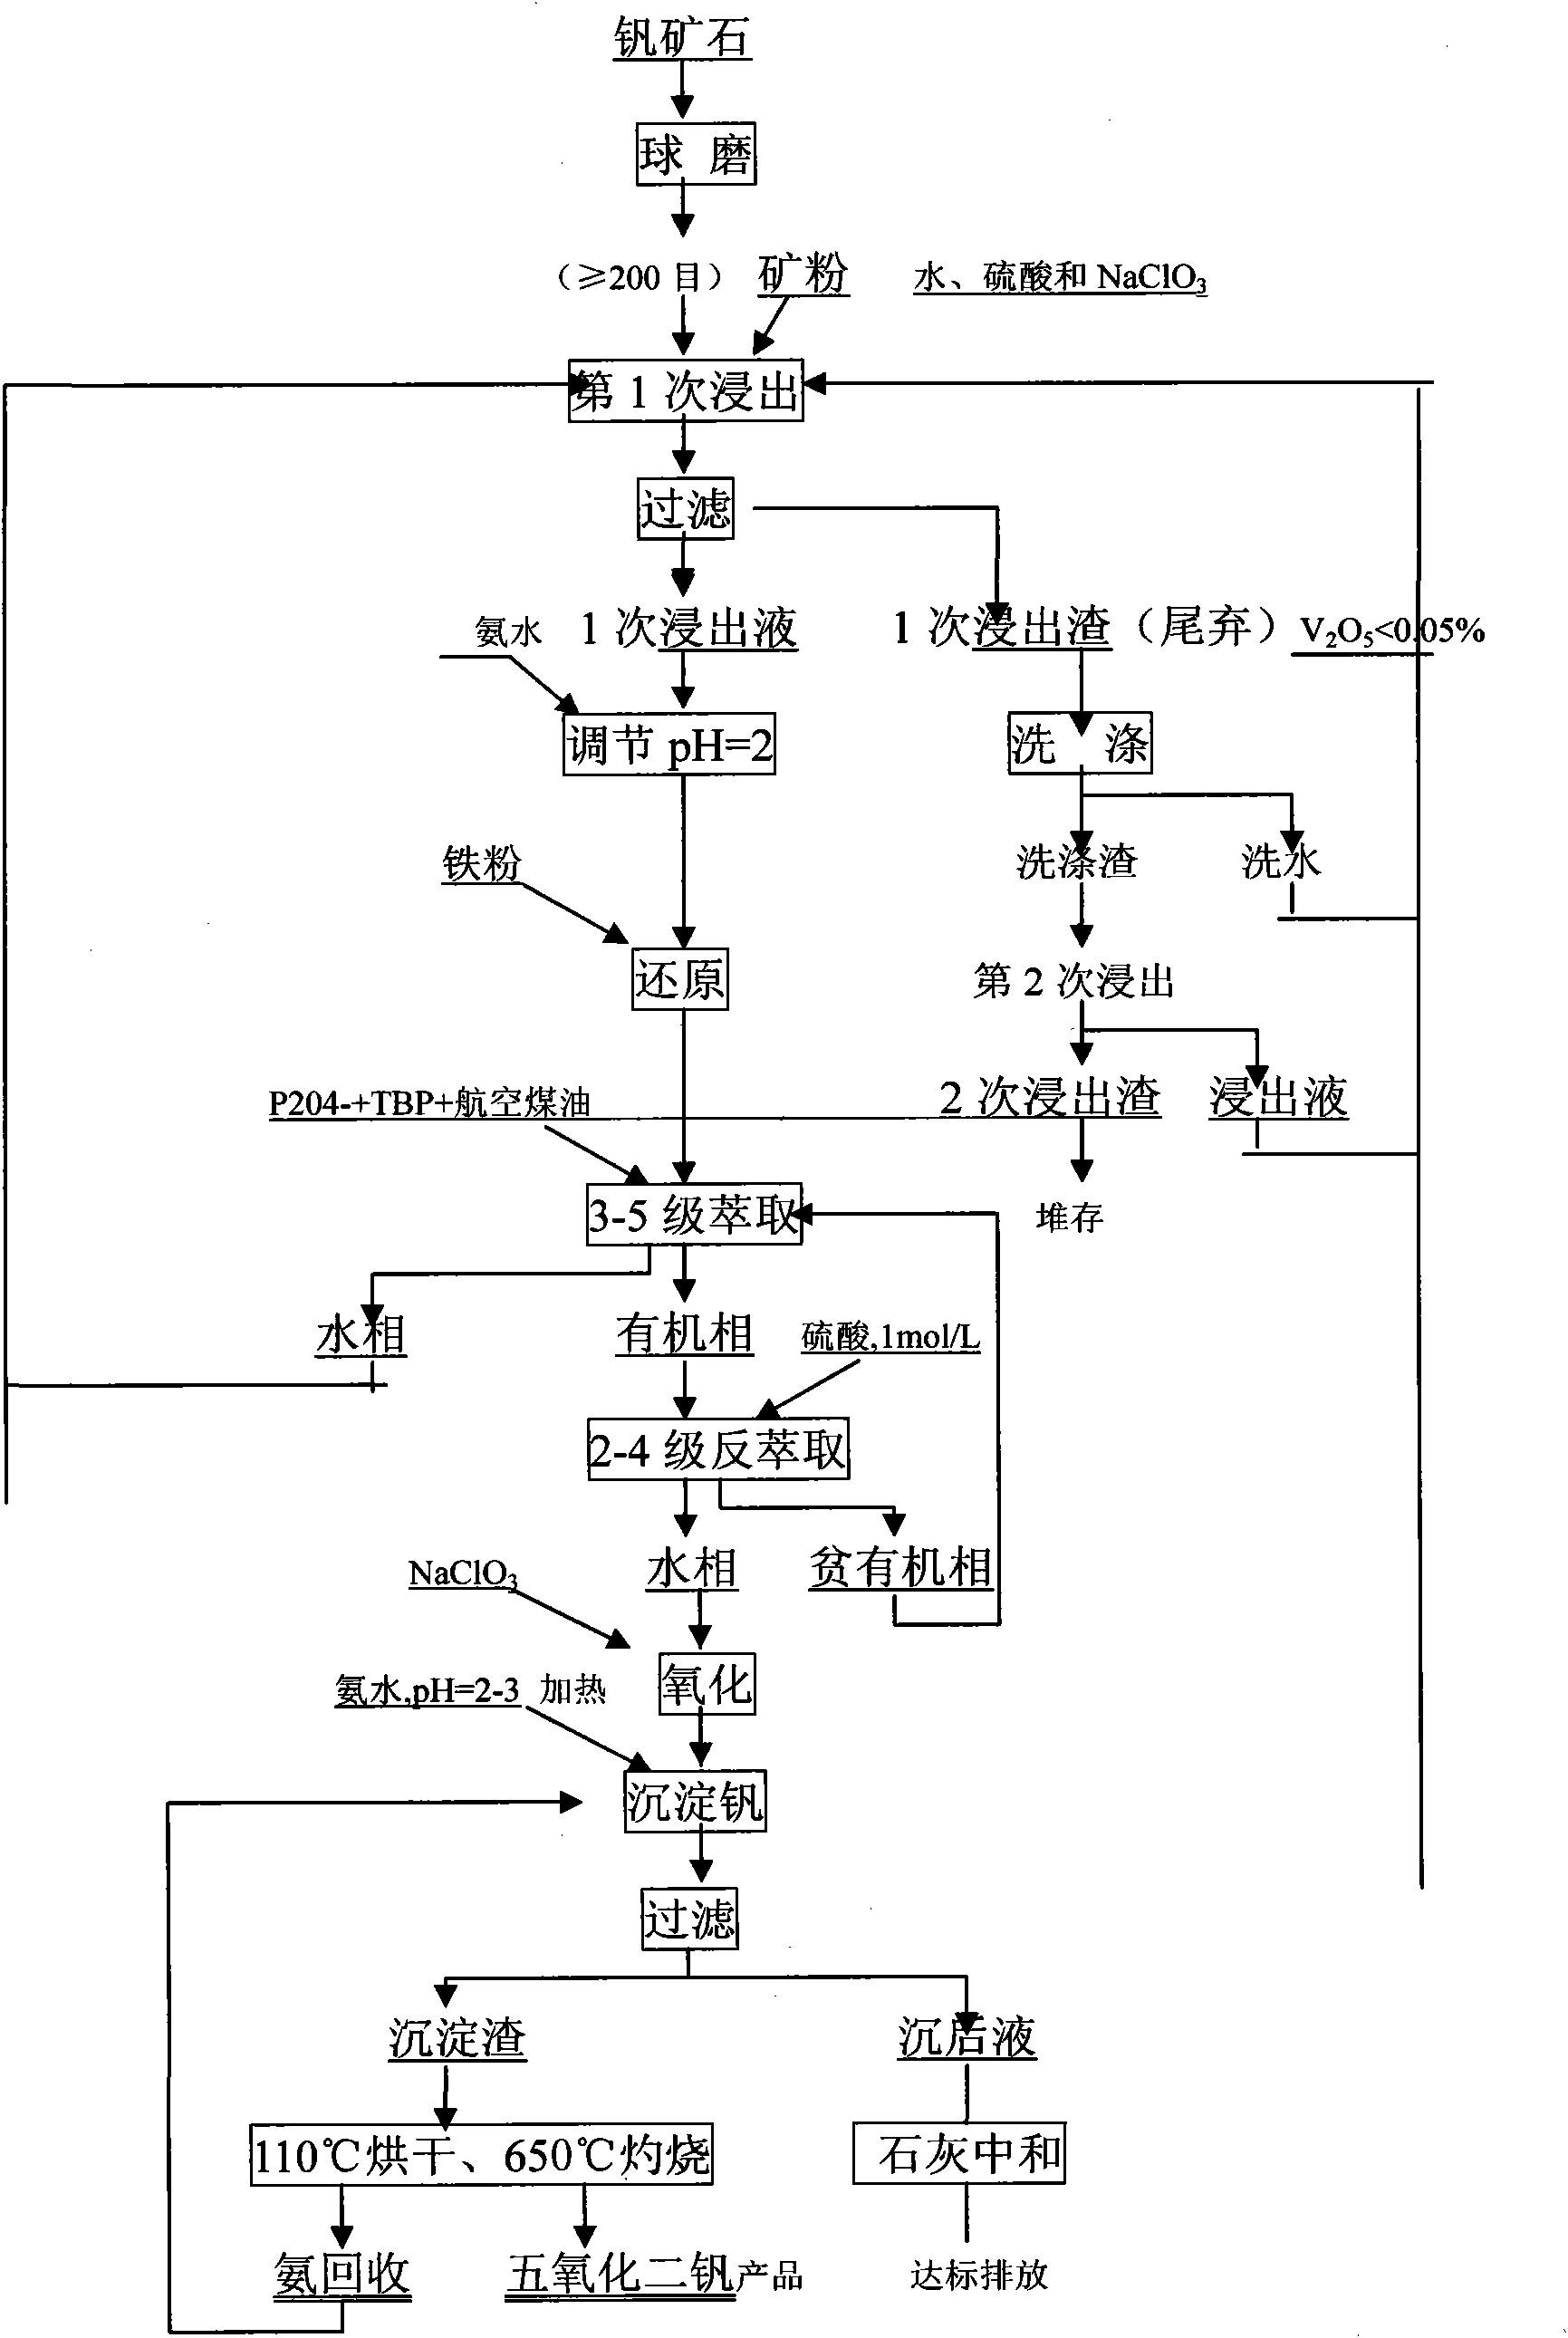 Method for recycling vanadium from vanadium ore containing high silicon and high carbon via wet process